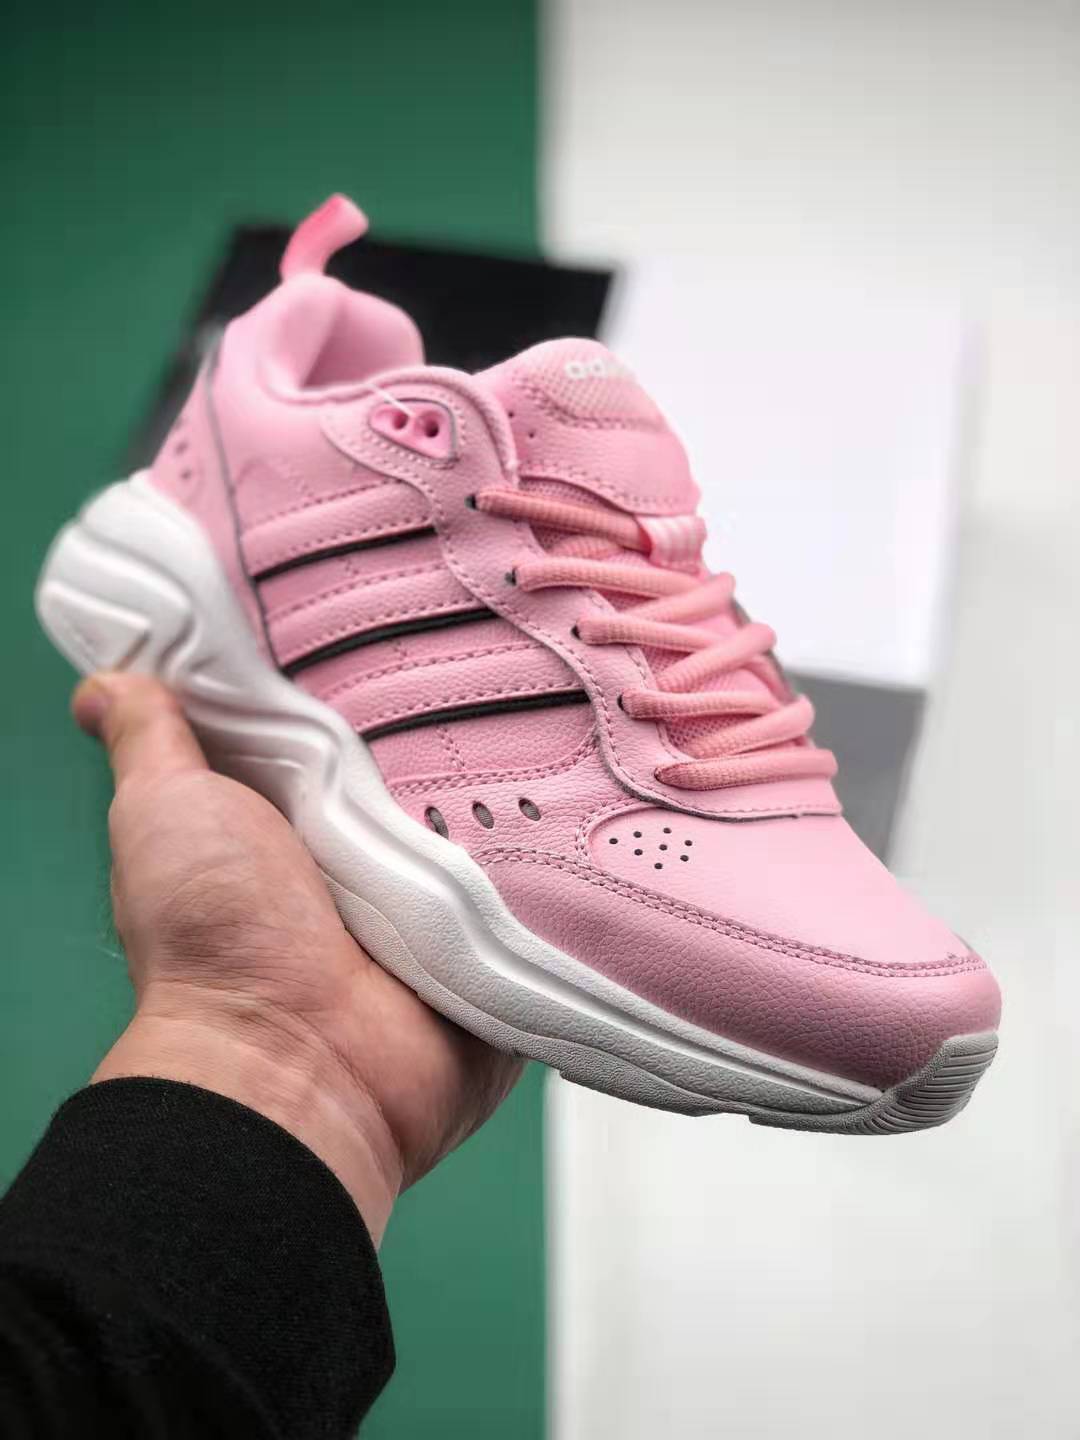 Adidas Neo Strutter Pink White EG6225 - Stylish and Comfortable Sneakers